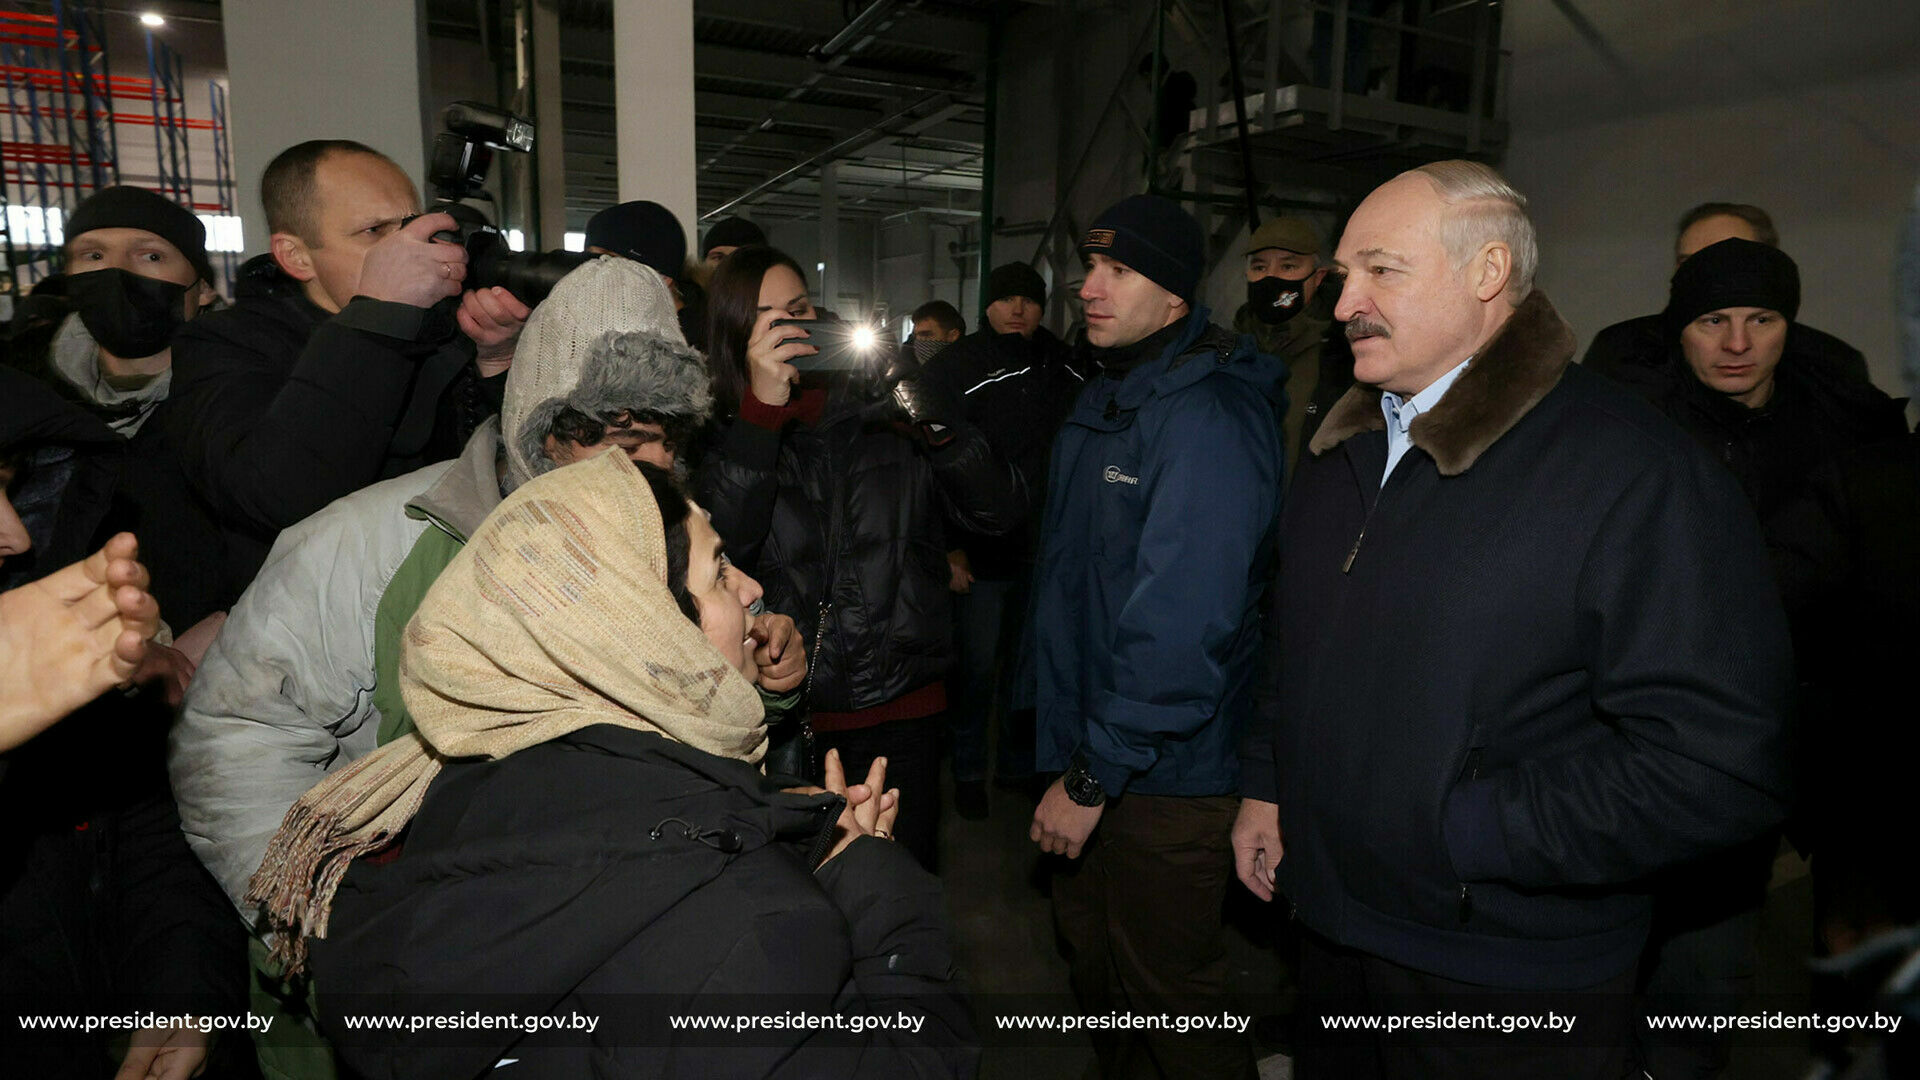 Lukashenko personally inspected the refugee camp on the border with Poland